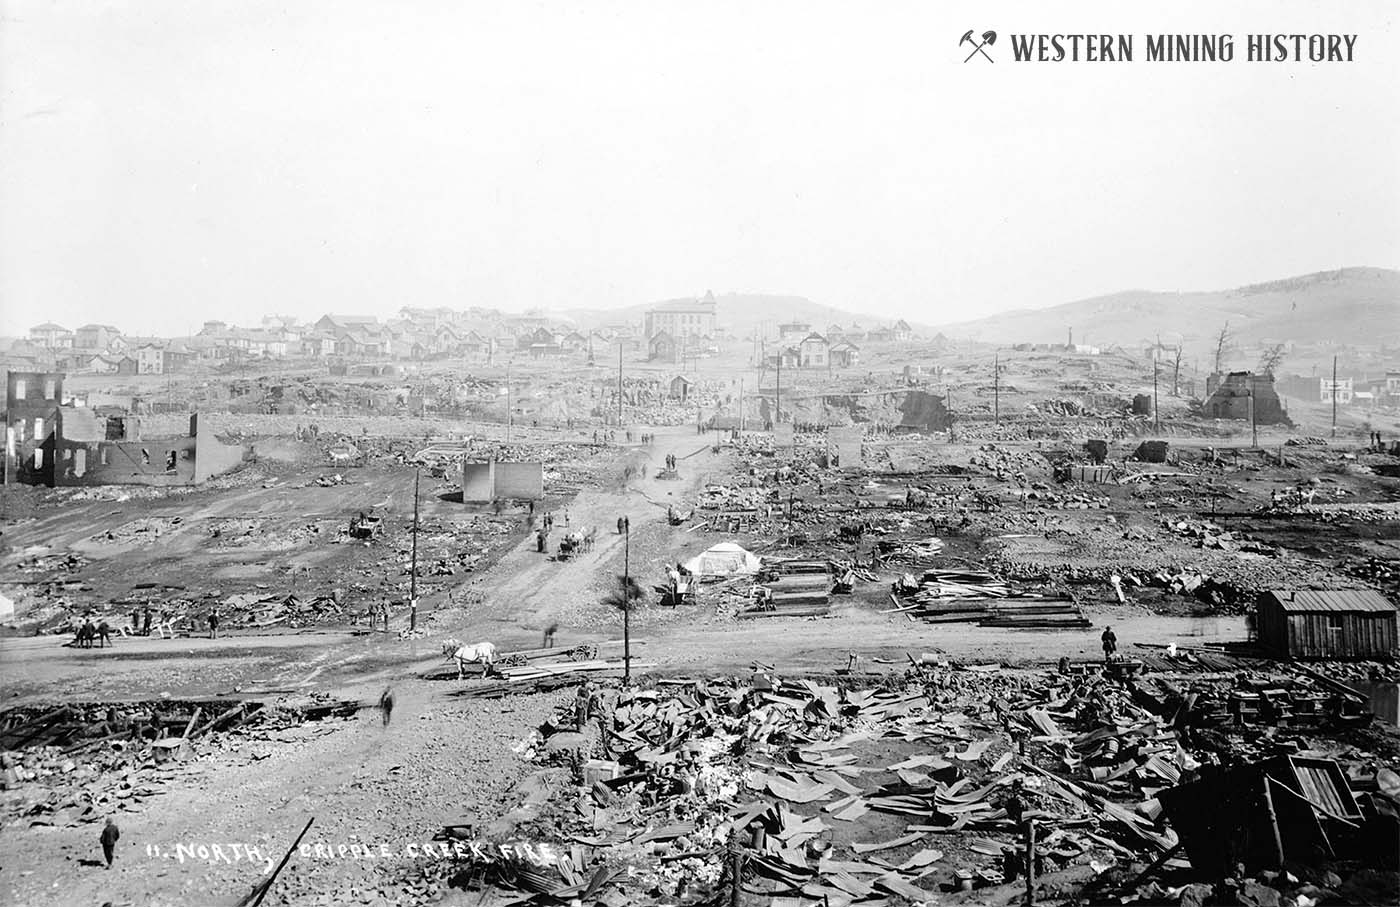 Aftermath of the 1896 Cripple Creek fire